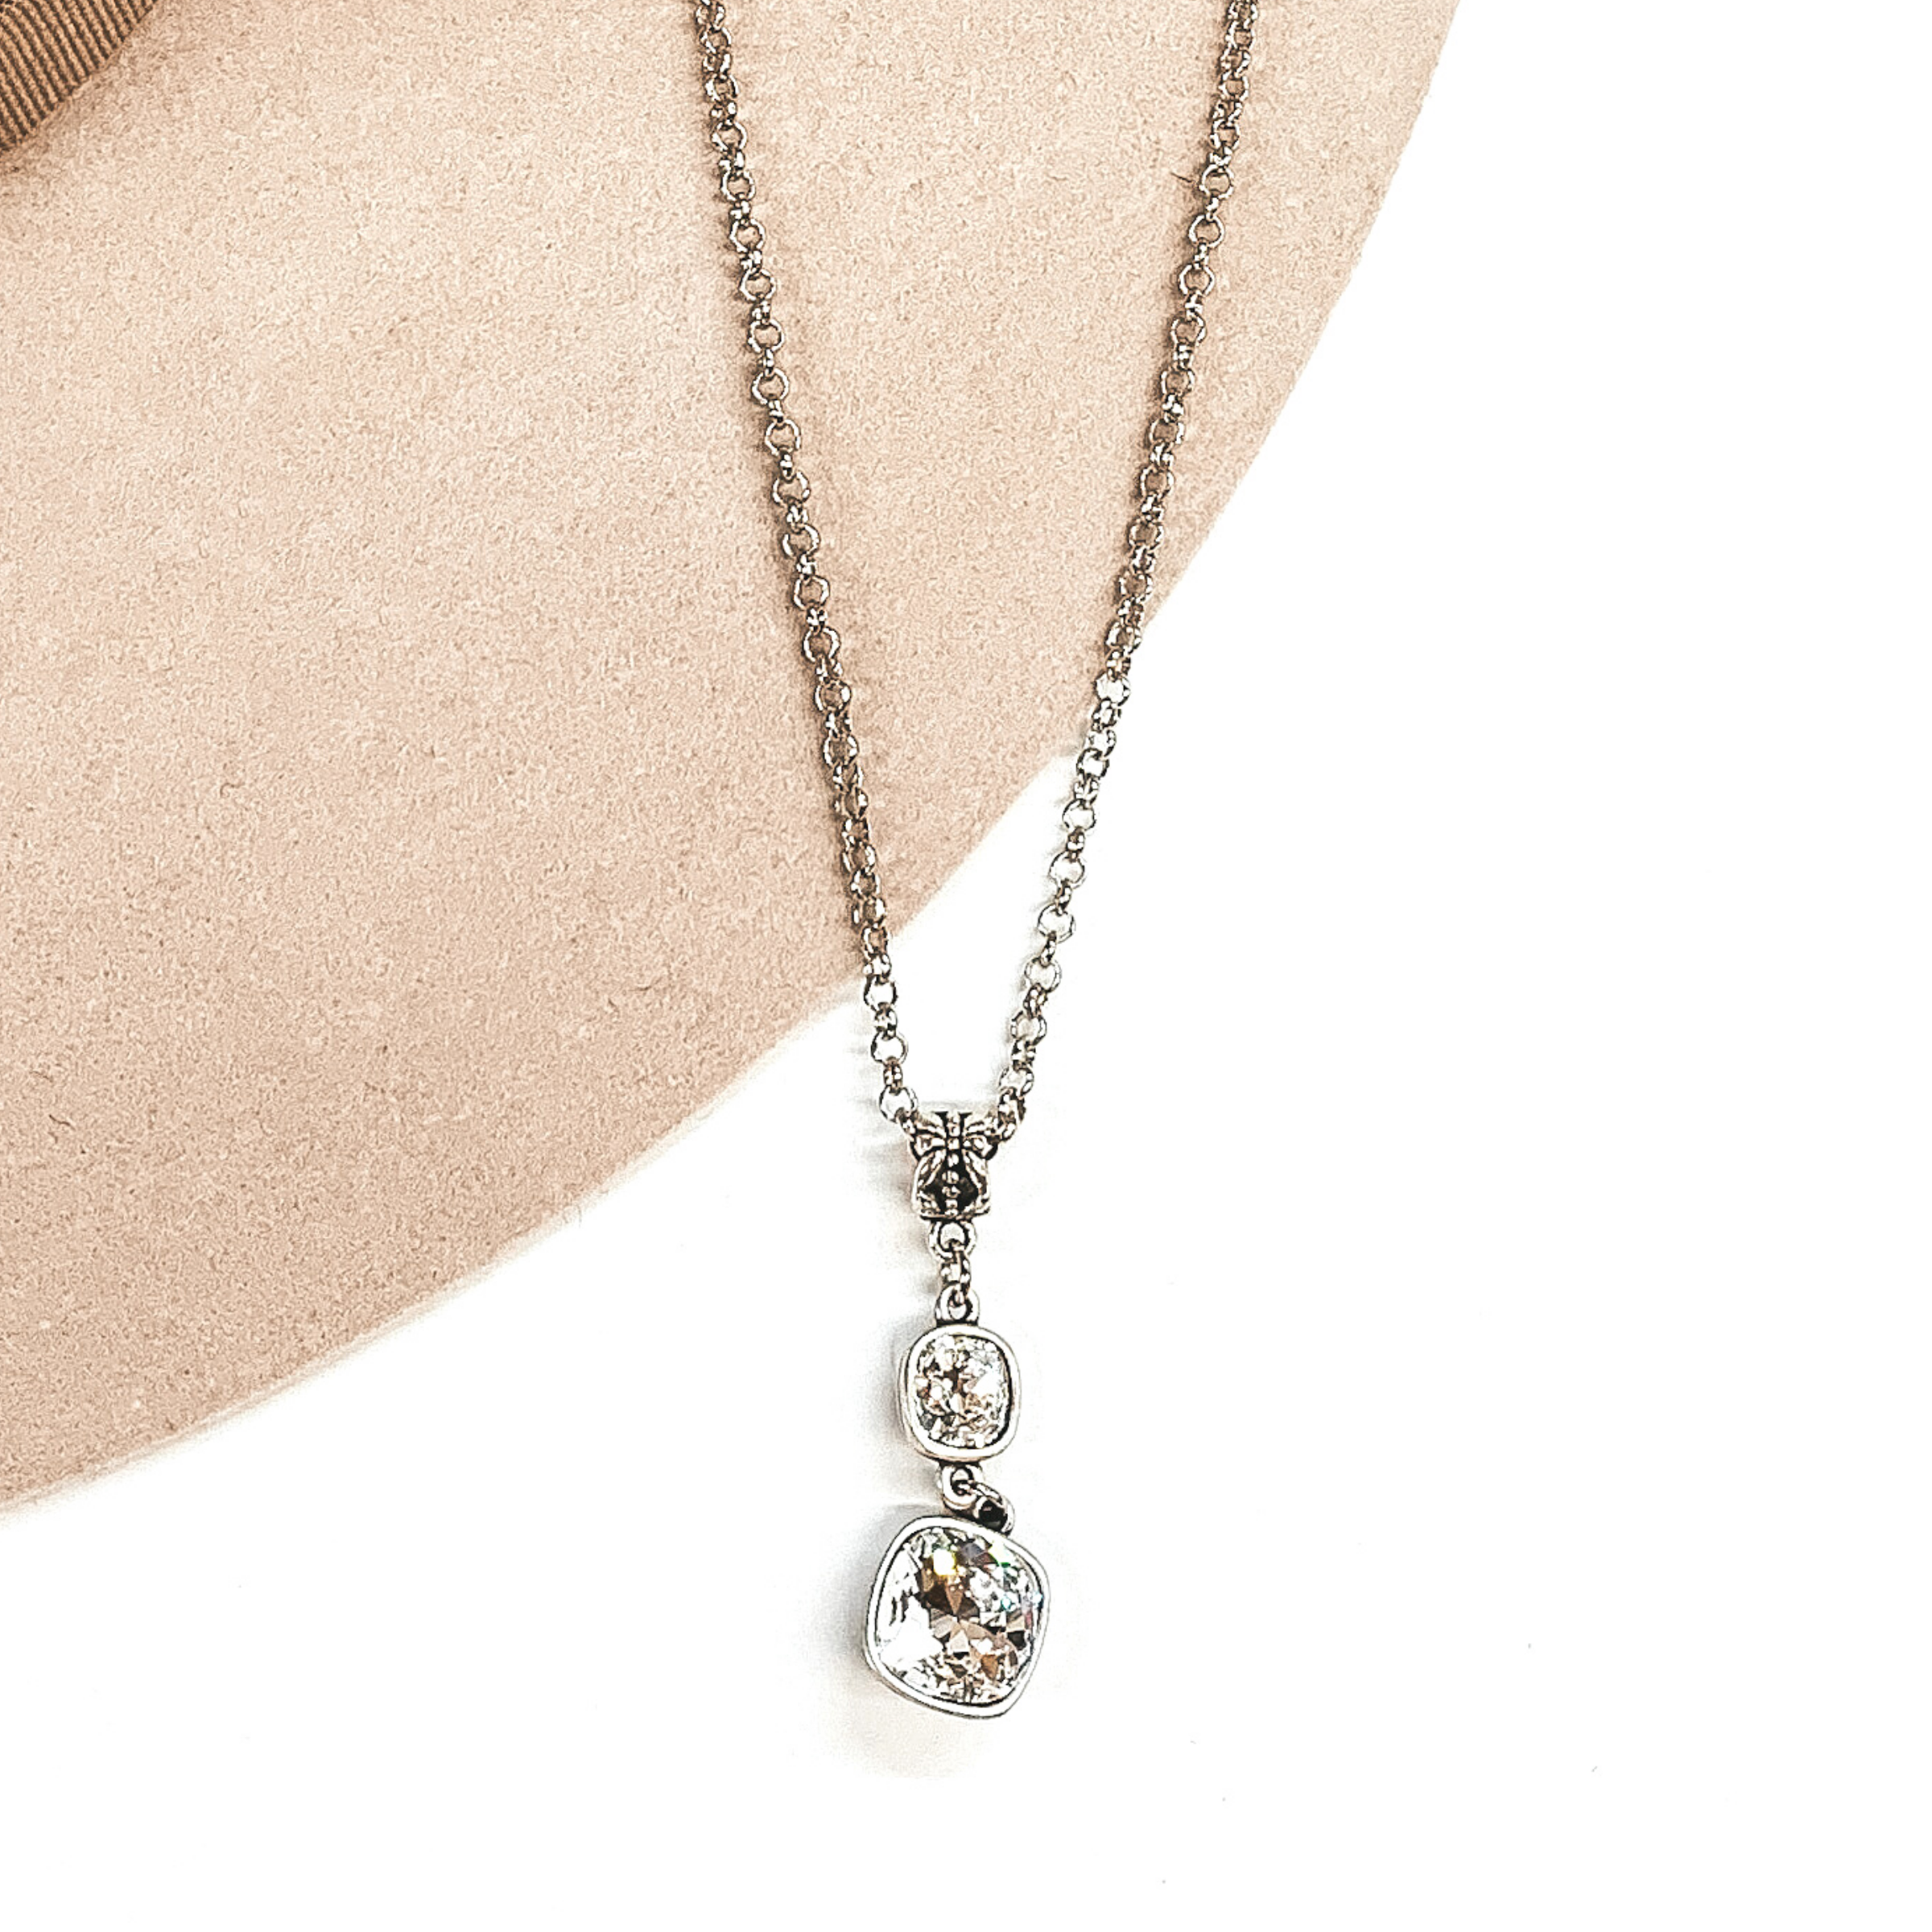 Silver adjustable chained necklace with a two clear square stone pendant on a white and beige background